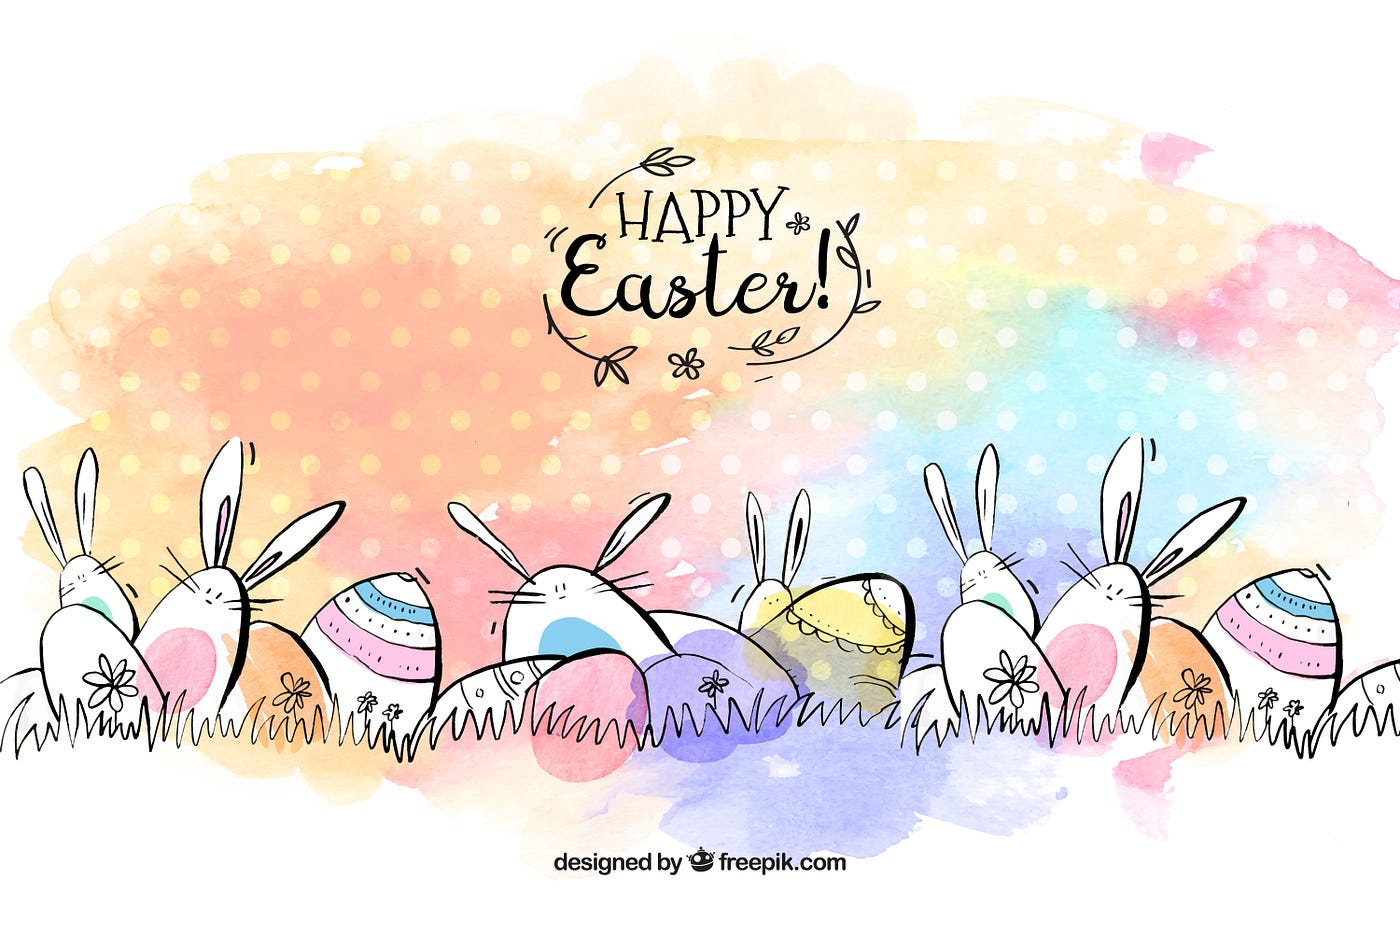 30 Amazing Easter Cards For Friends And Family, by Vectr